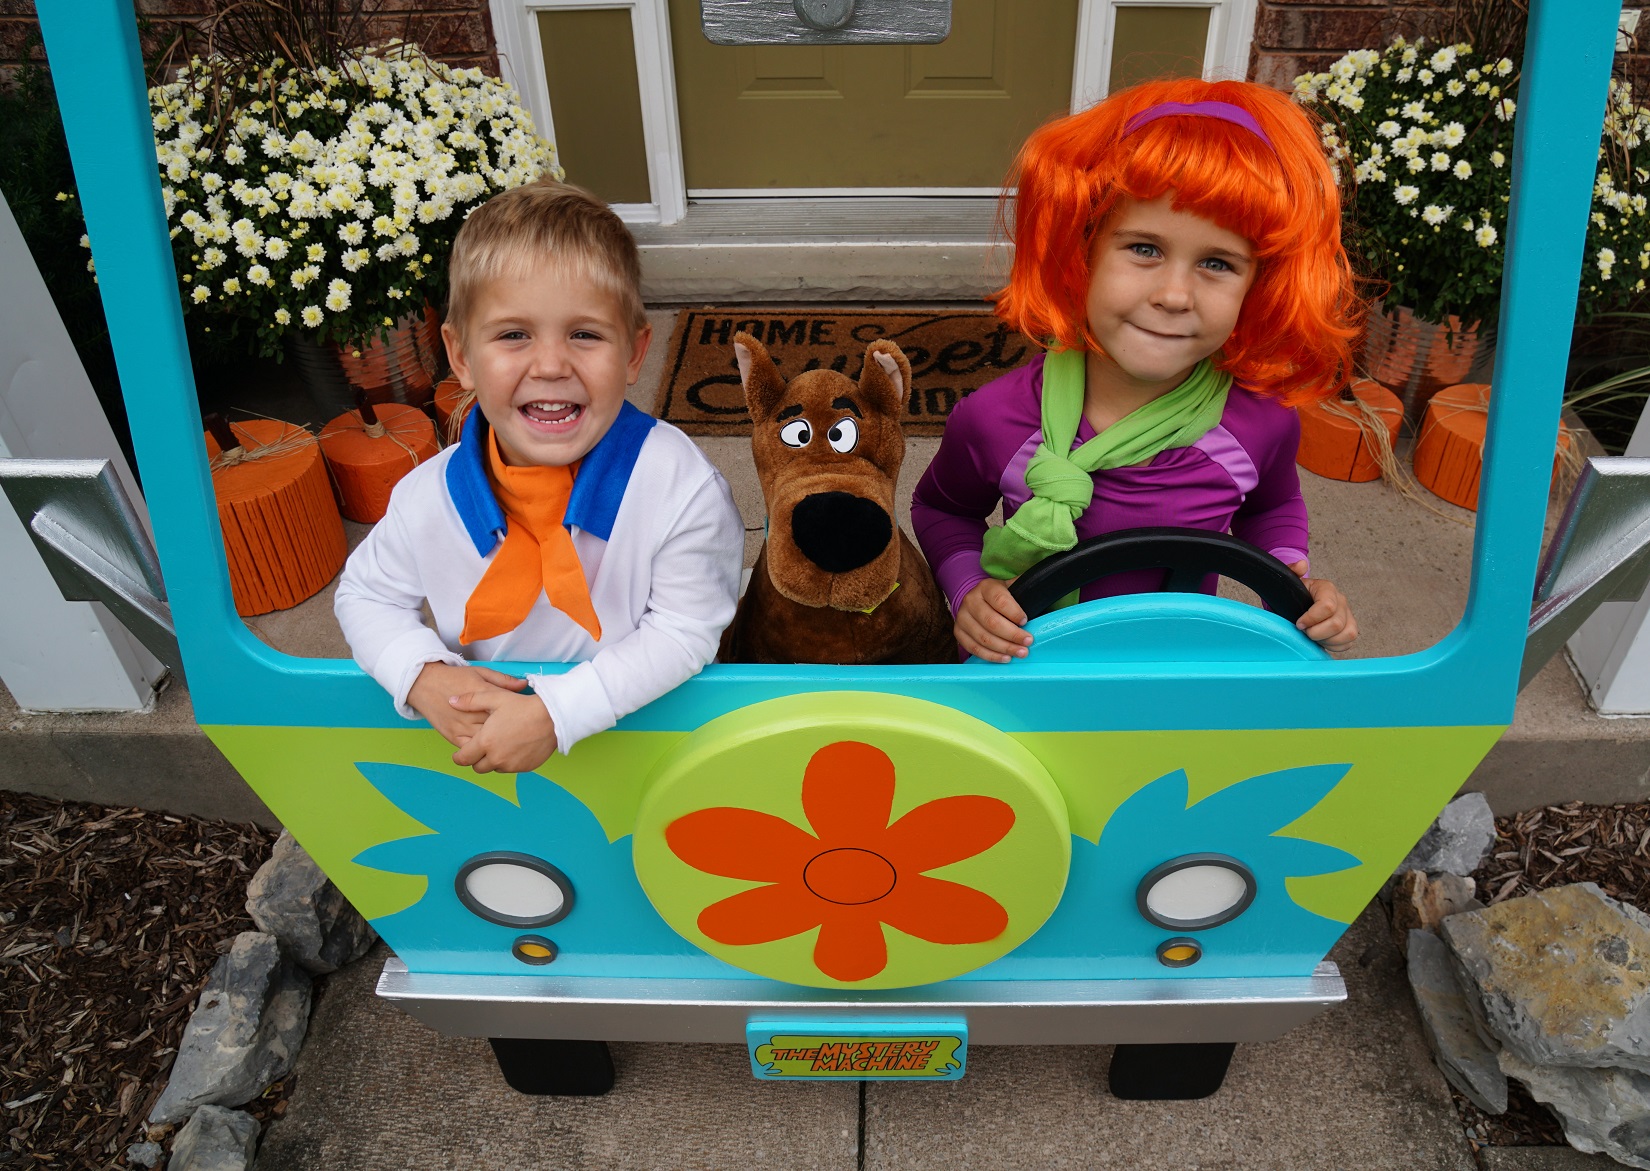 Coolest Scooby Doo Family Costume with Hand Built Mystery Machine!